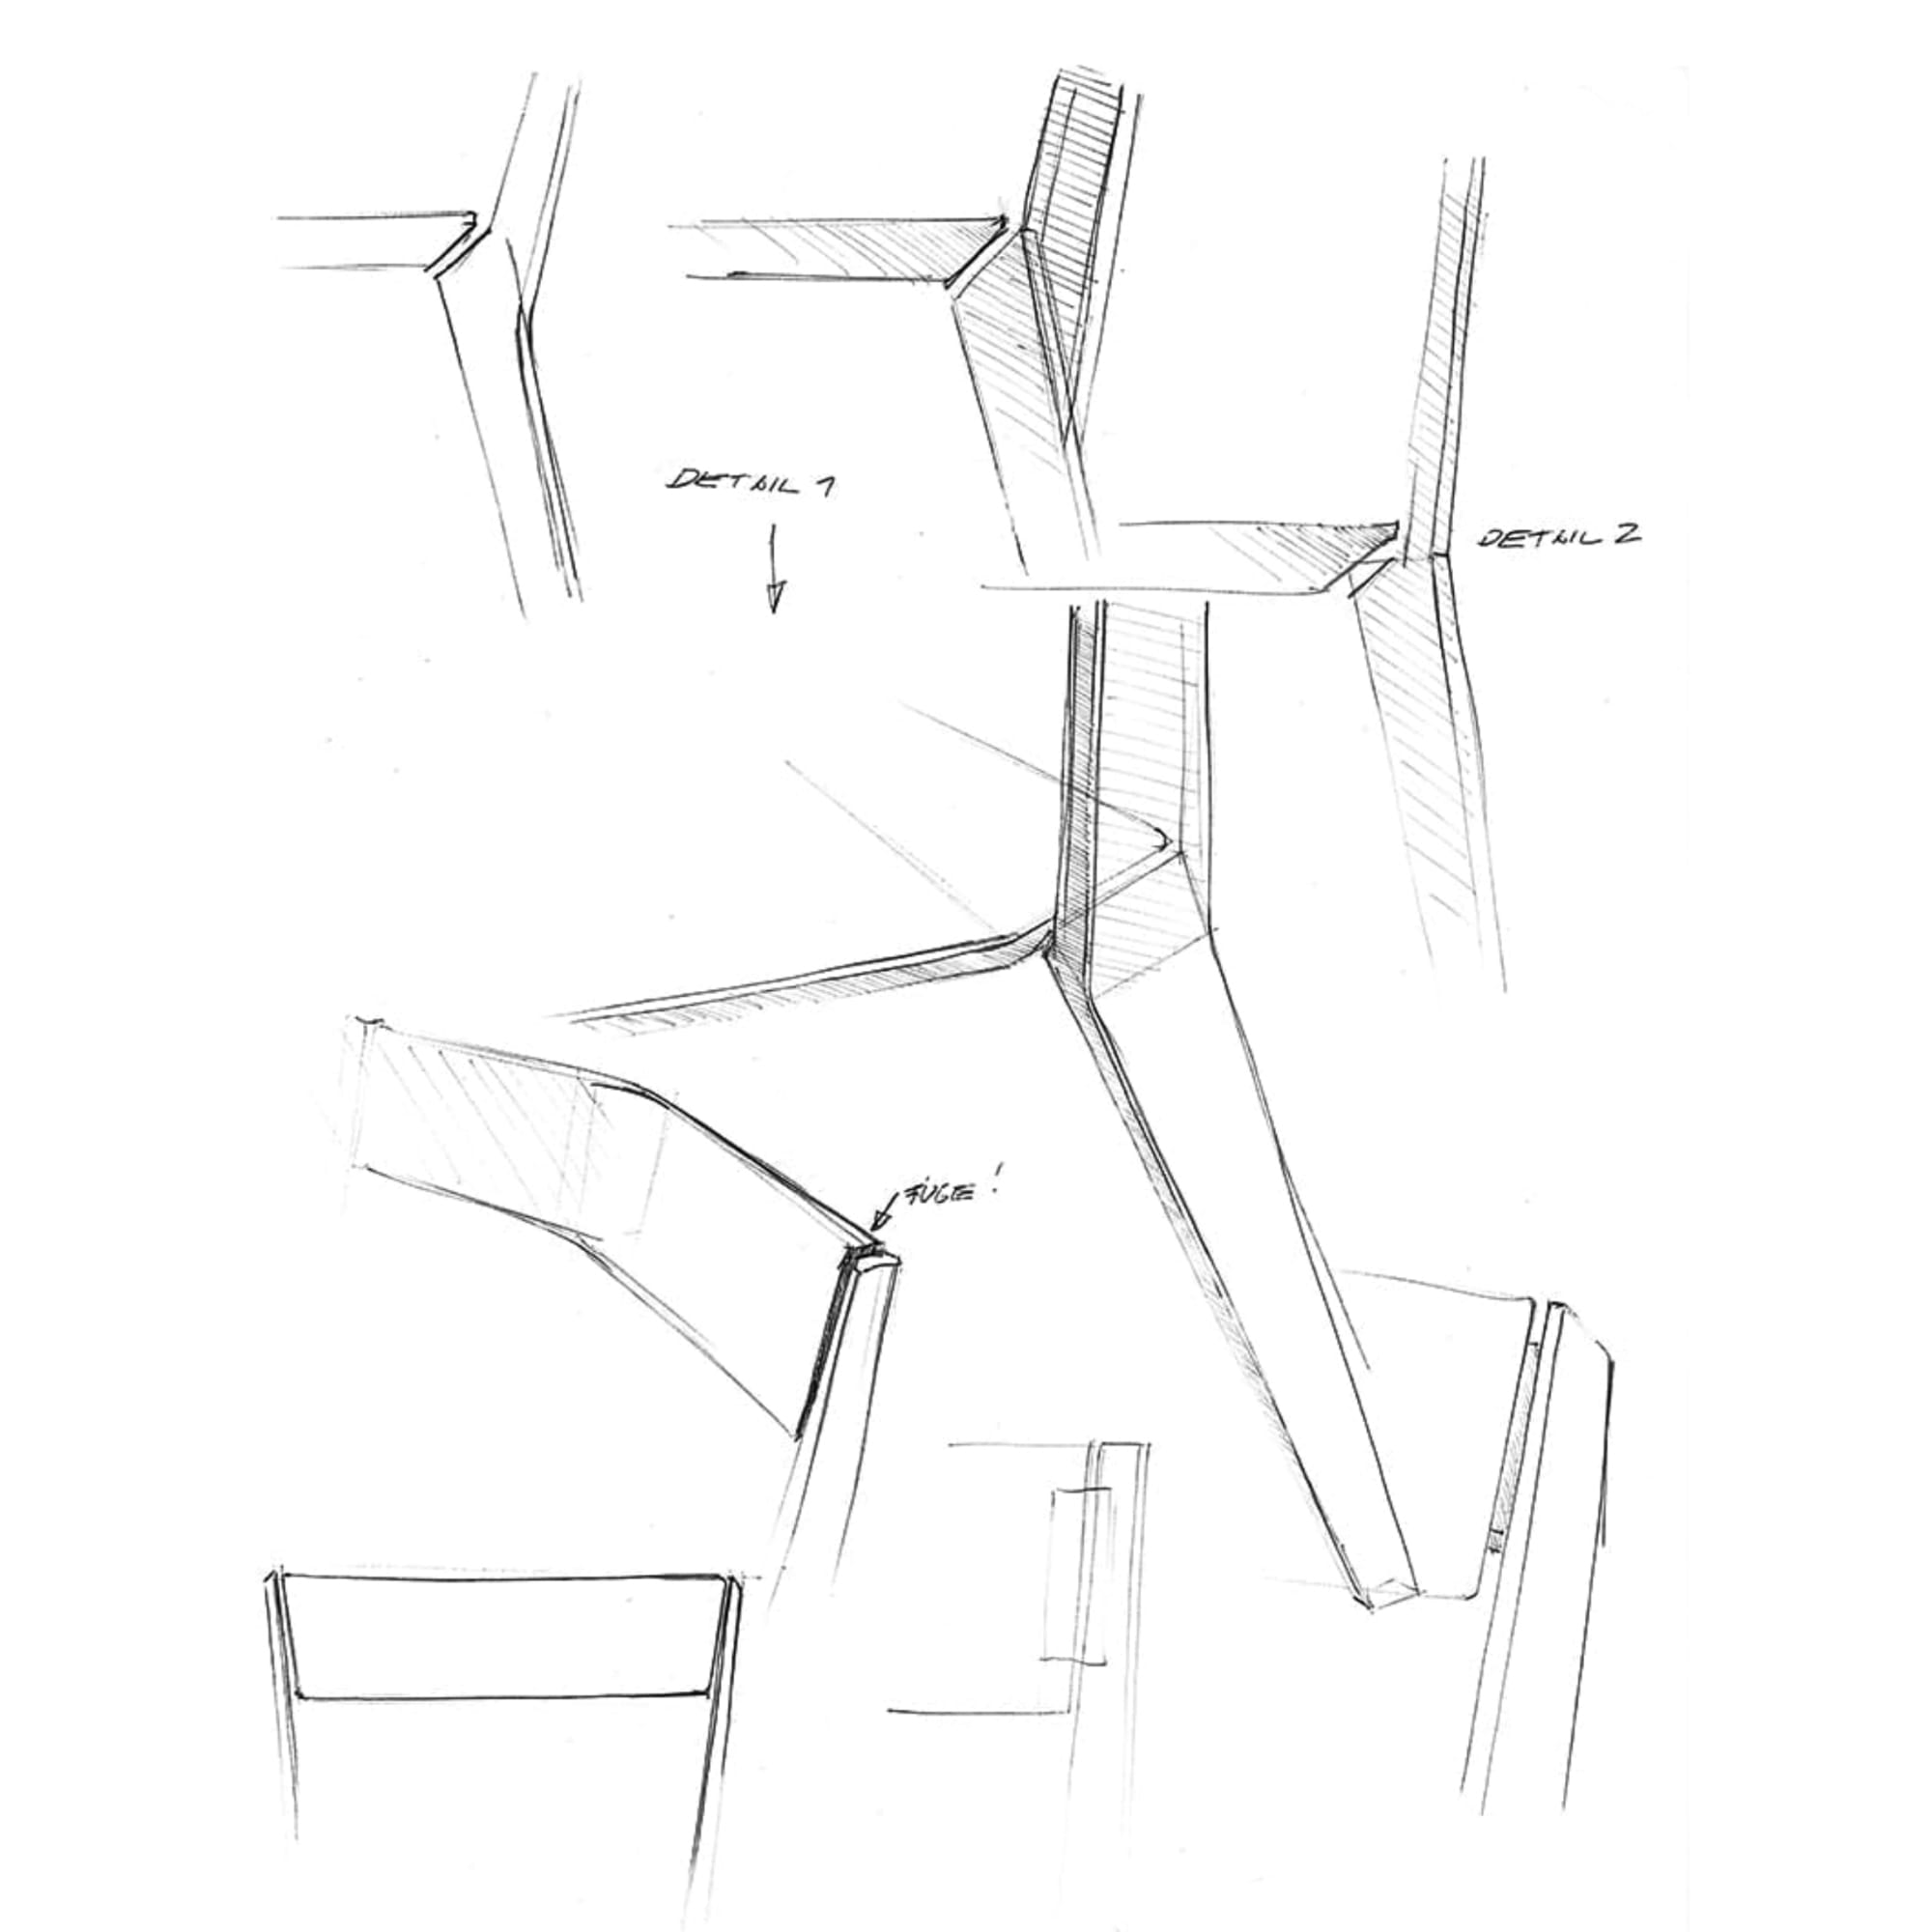 Sketch of Finn Chair showing variations in the connection between the backrest, seat, and legs